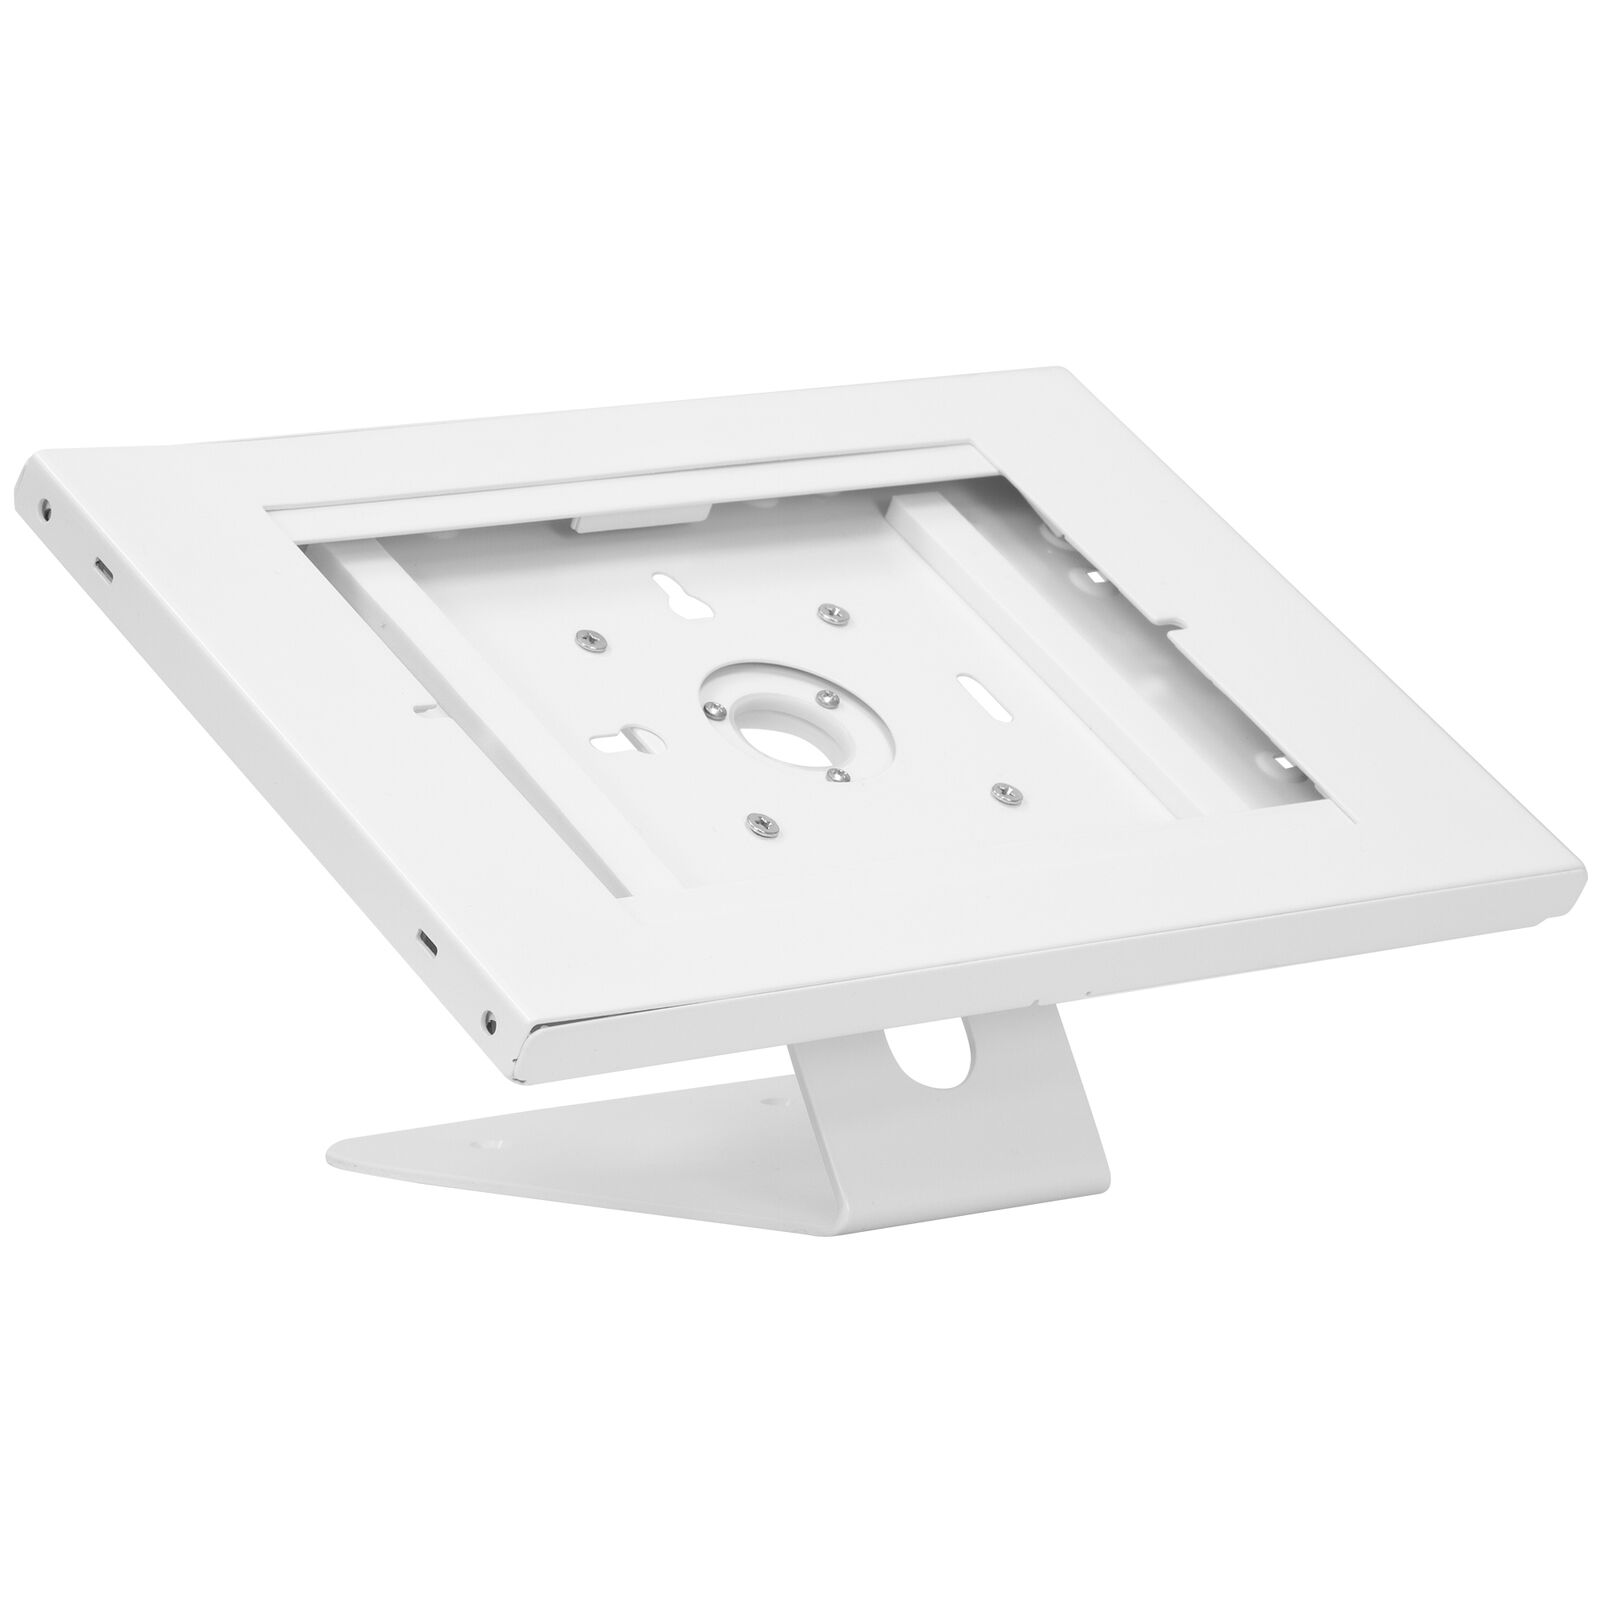 Mount-it MI211128X Anti-Theft Tablet Kiosk with Countertop and Wall Mount Base